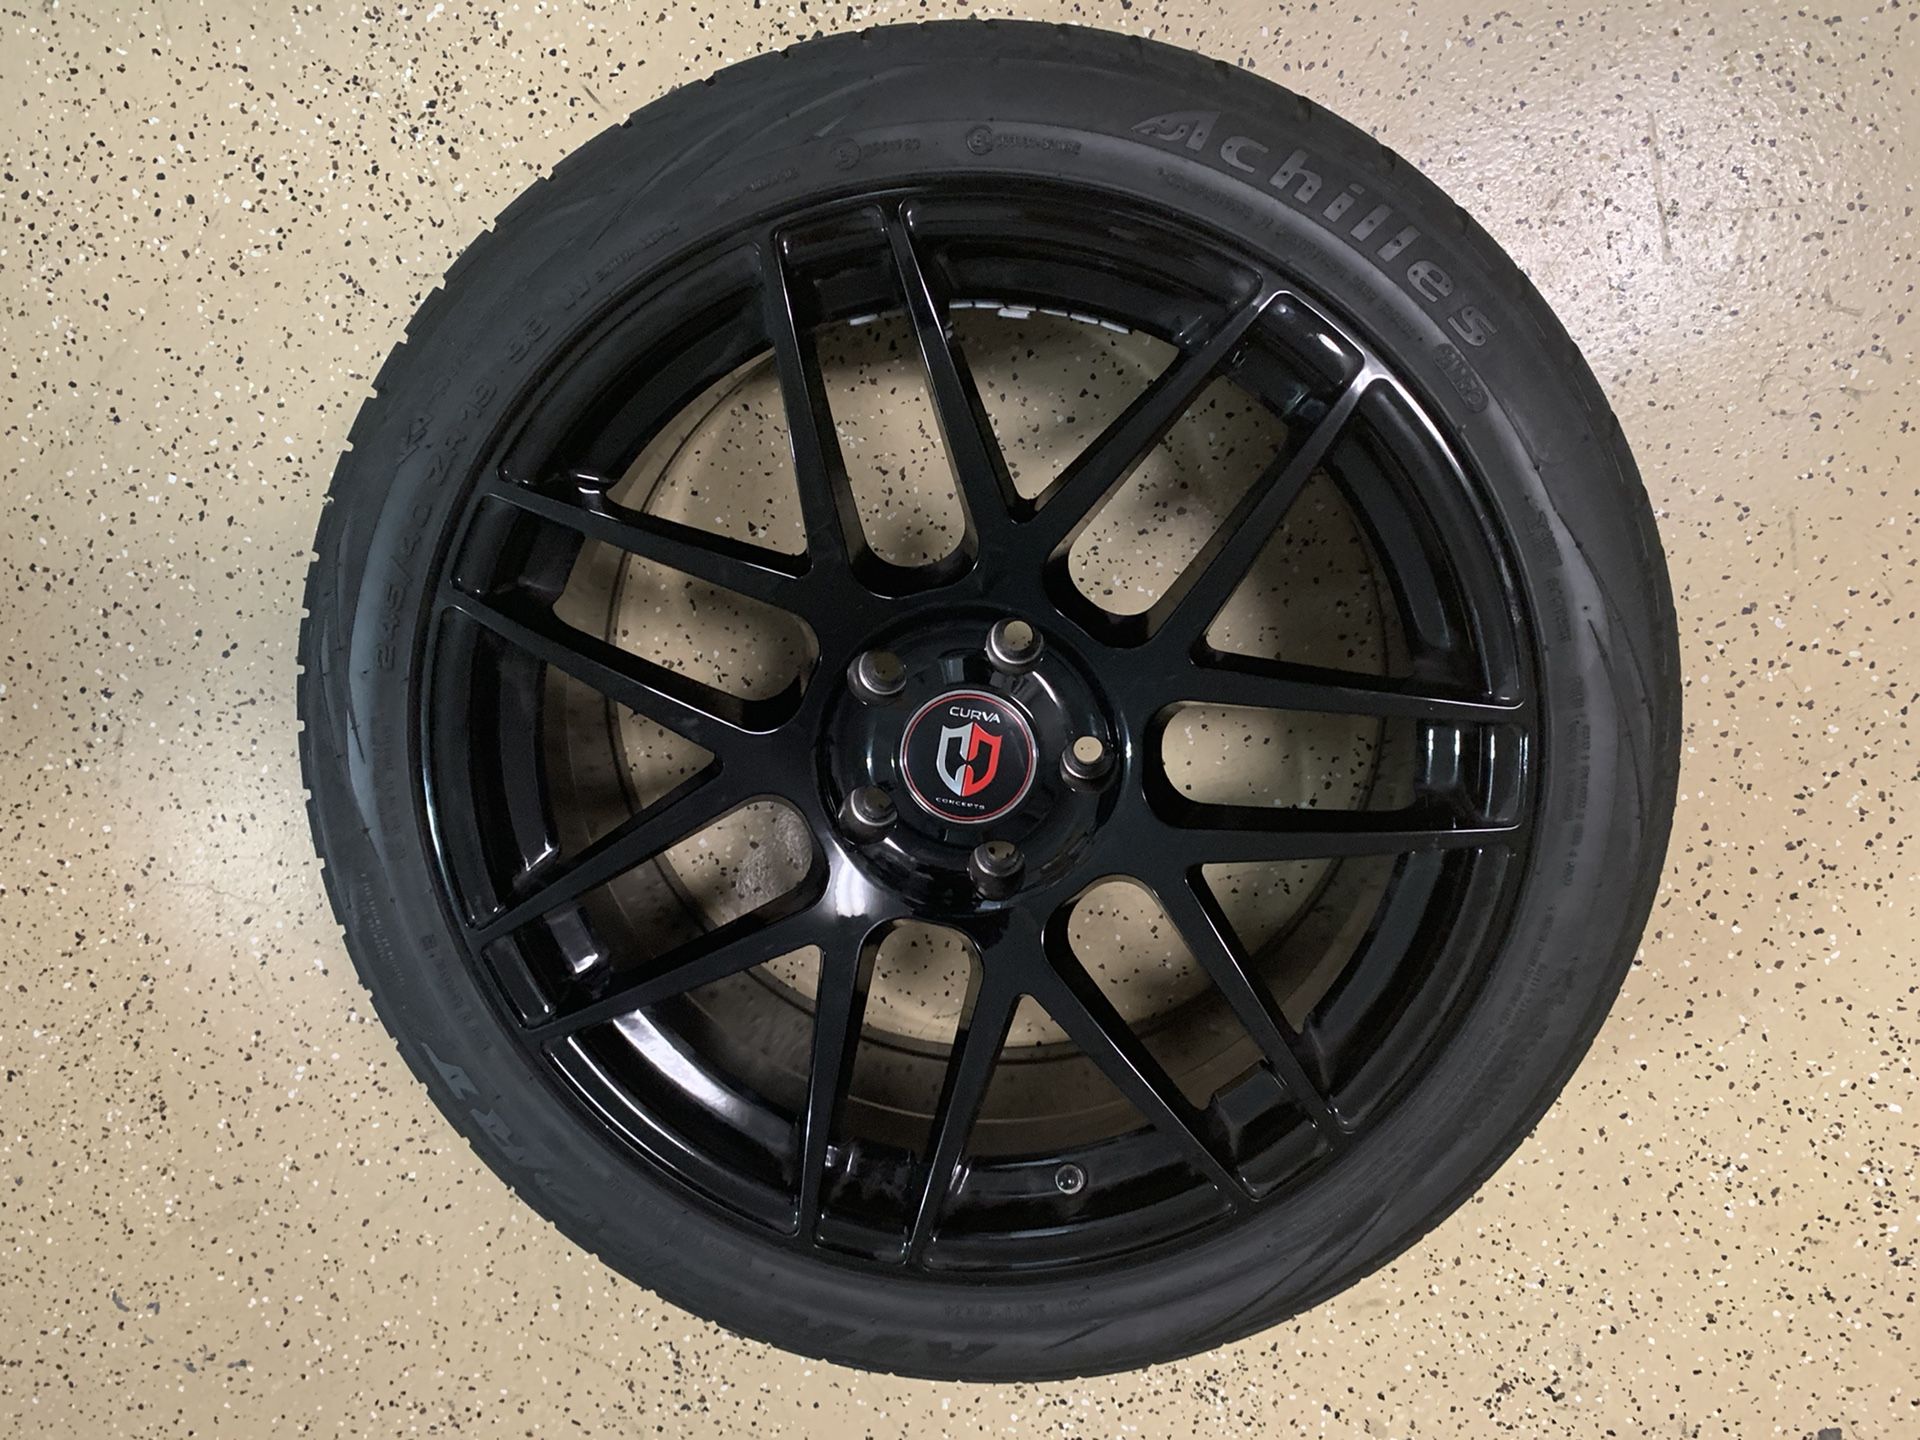 Curva RIMS 19 * 8.5 model c300 with tires. Almost new rims with tires with less than 2k miles. Retails for $1400, Great BMW upgrade. Bolt sequence 5